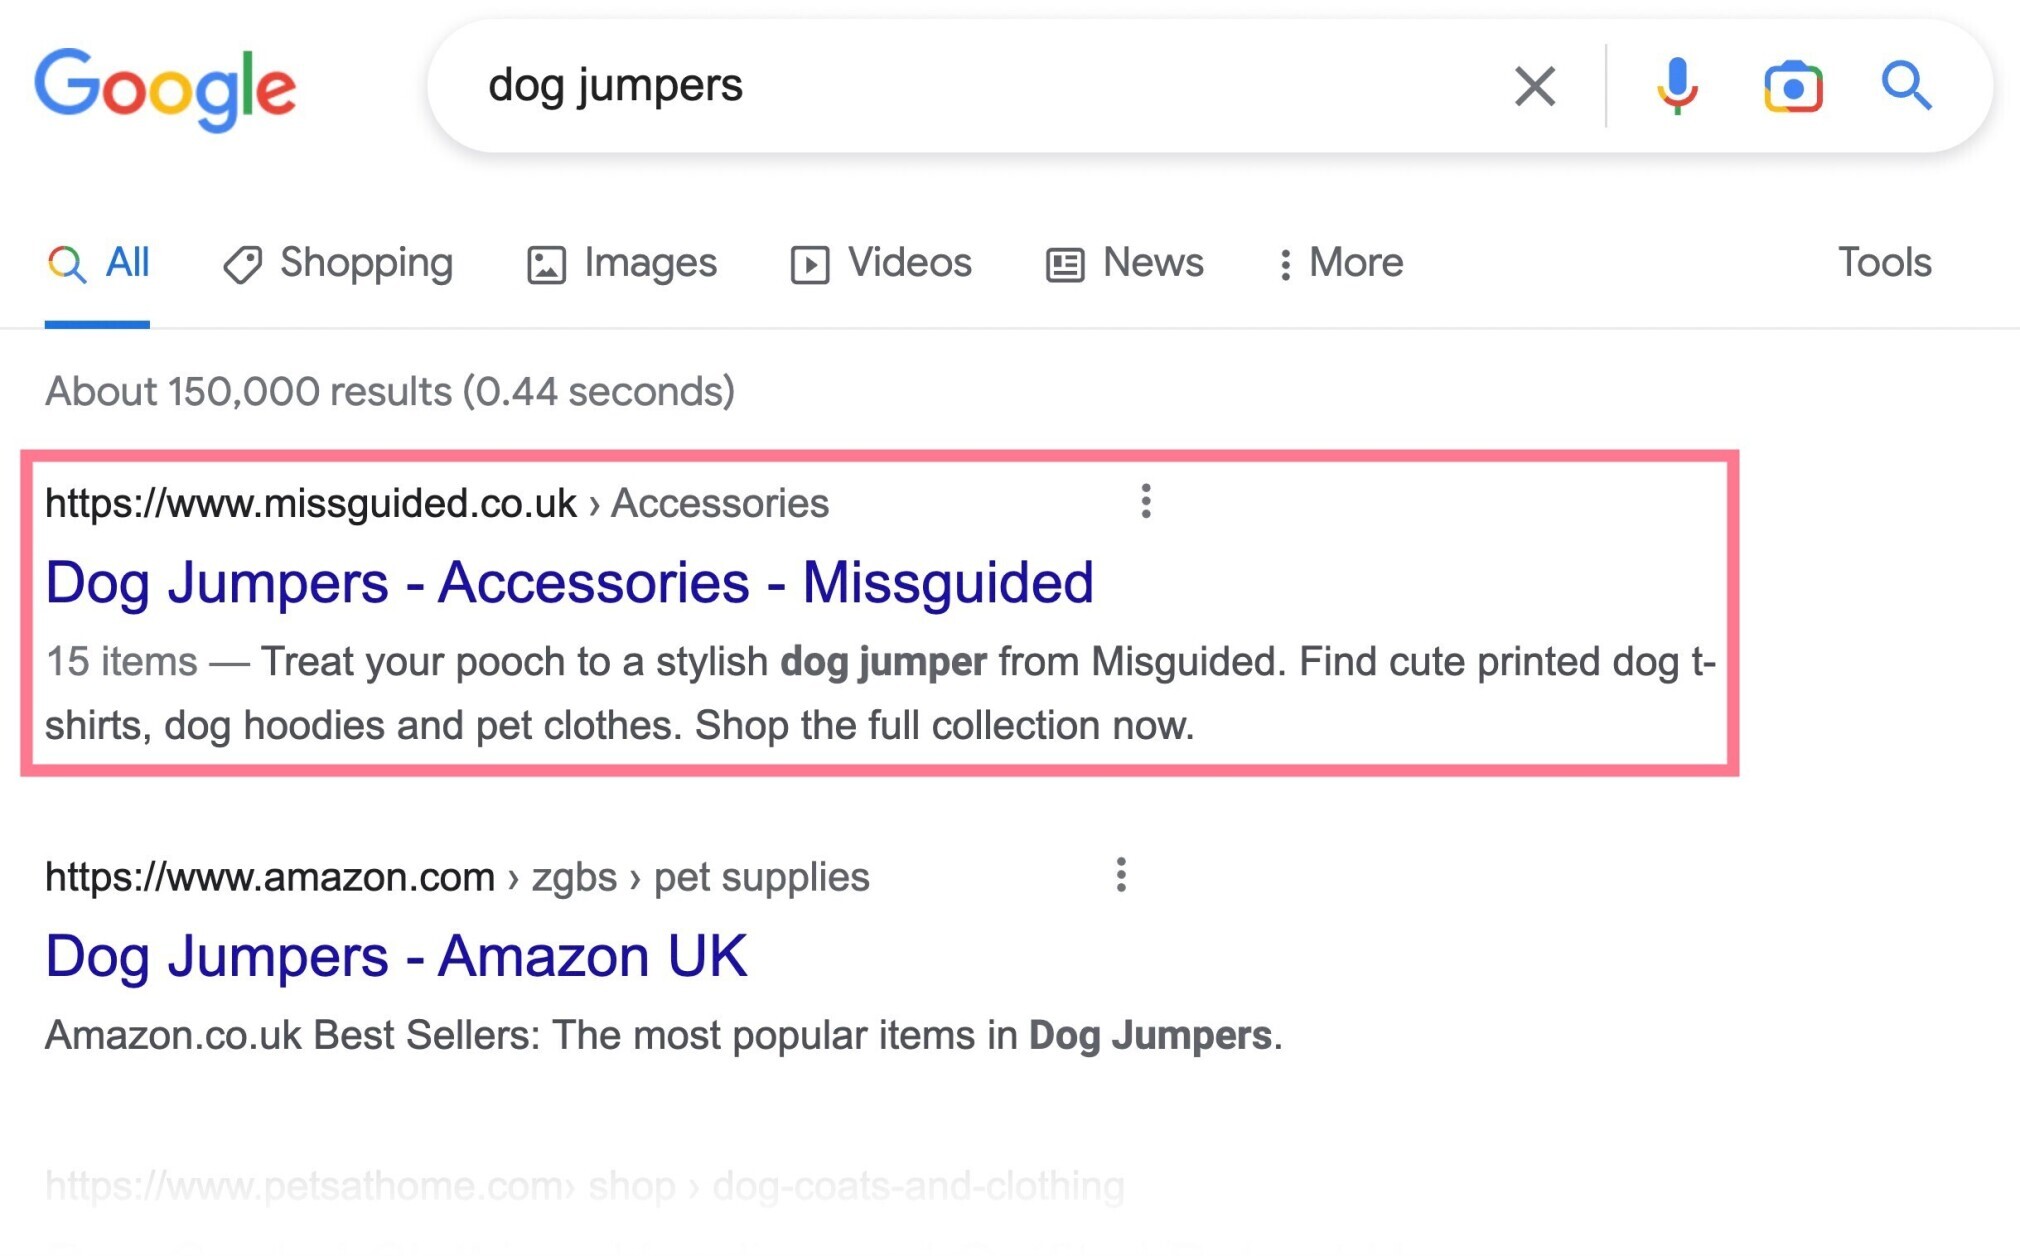 Missguided ranked #1 for the keyword "dog jumpers"